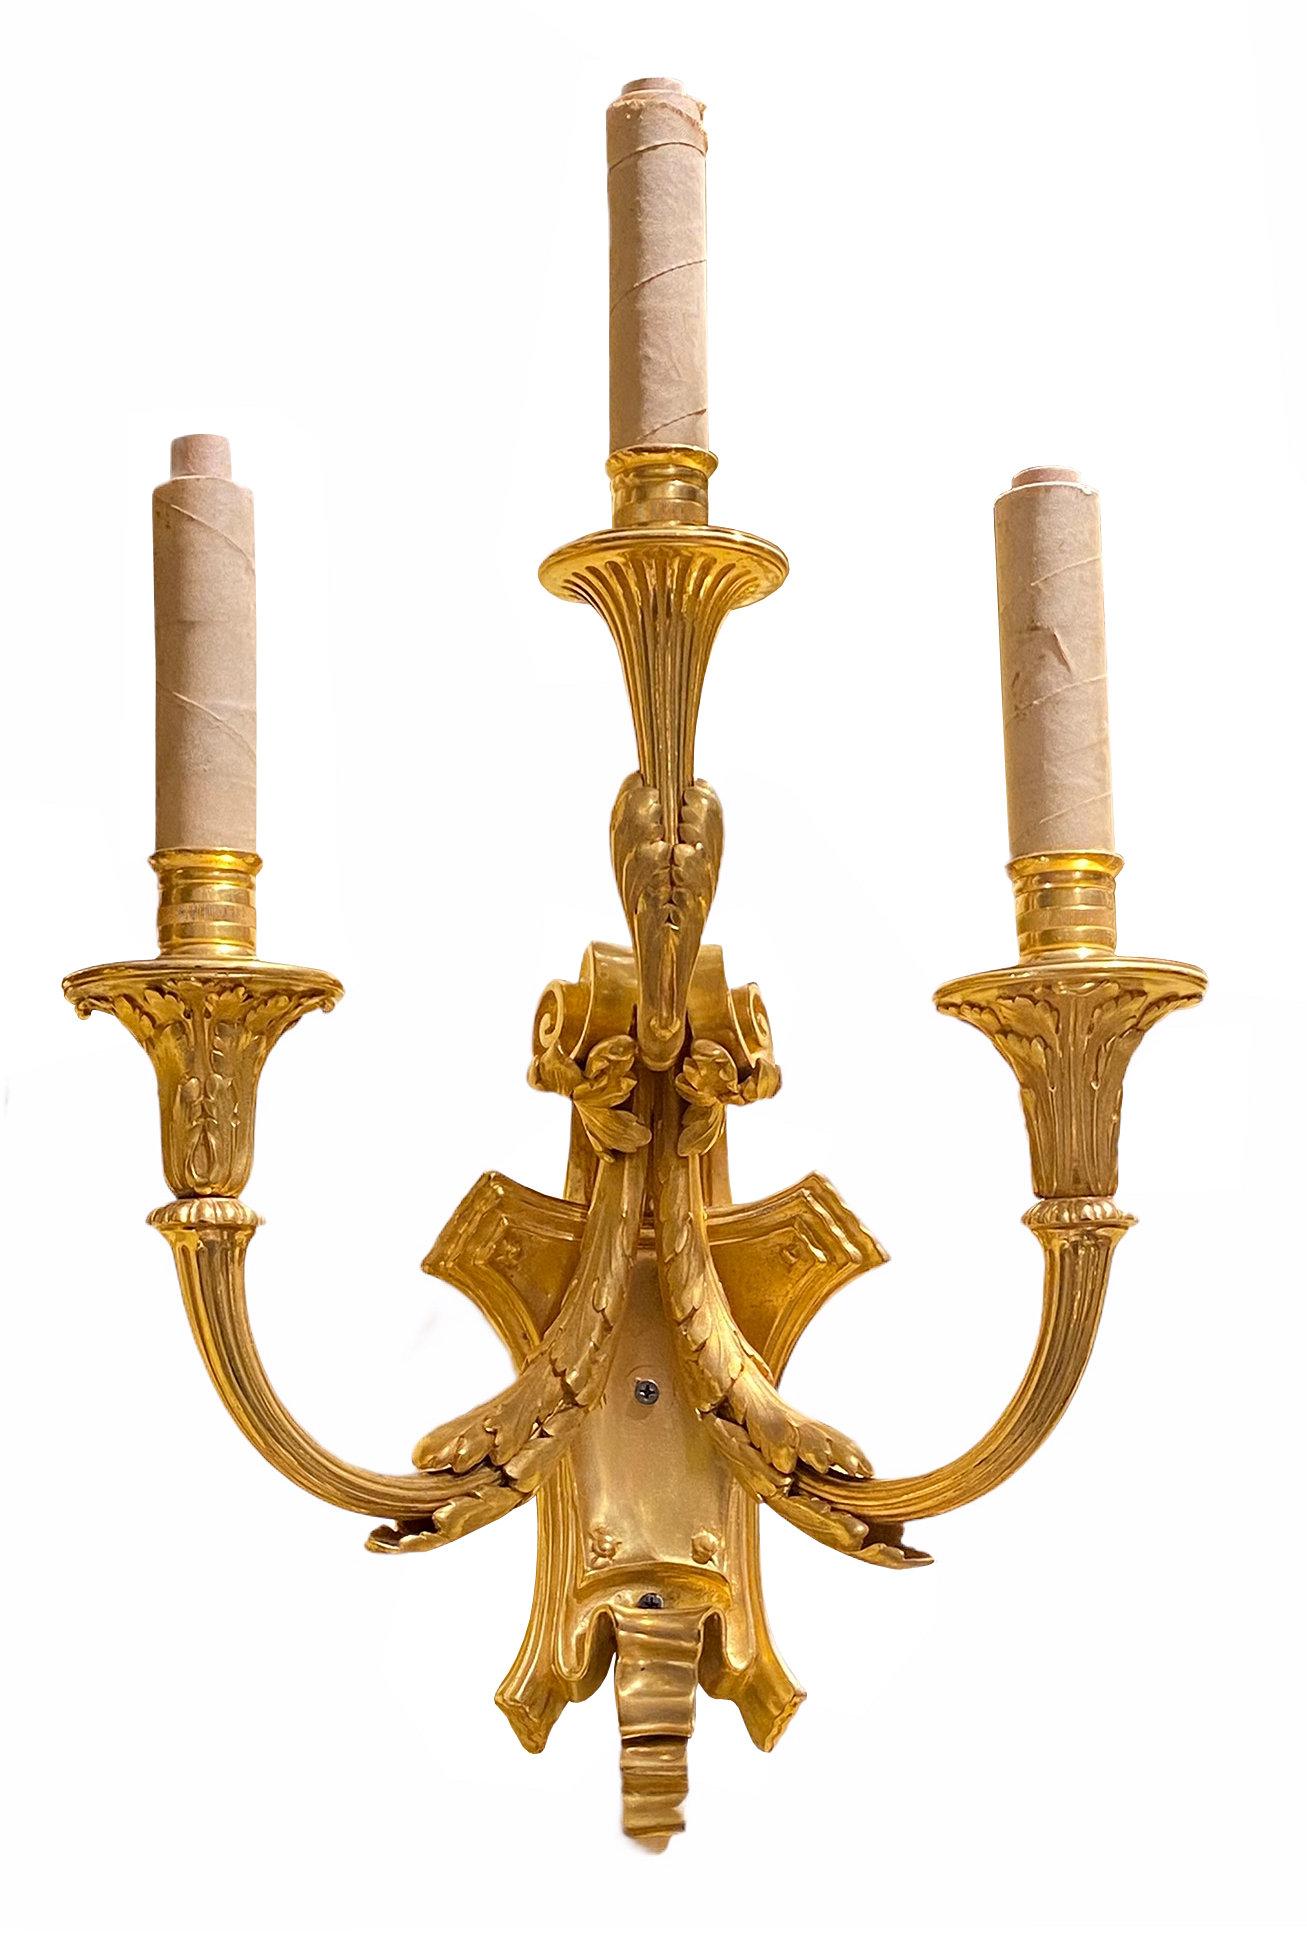 Pair American 19th century gilt bronze three-light sconces in the neoclassical Louis XVI style from Edward F. Caldwell, exhibiting the finest casting, finishing and gilding. With impressed mark of the maker on rear and original sockets with white